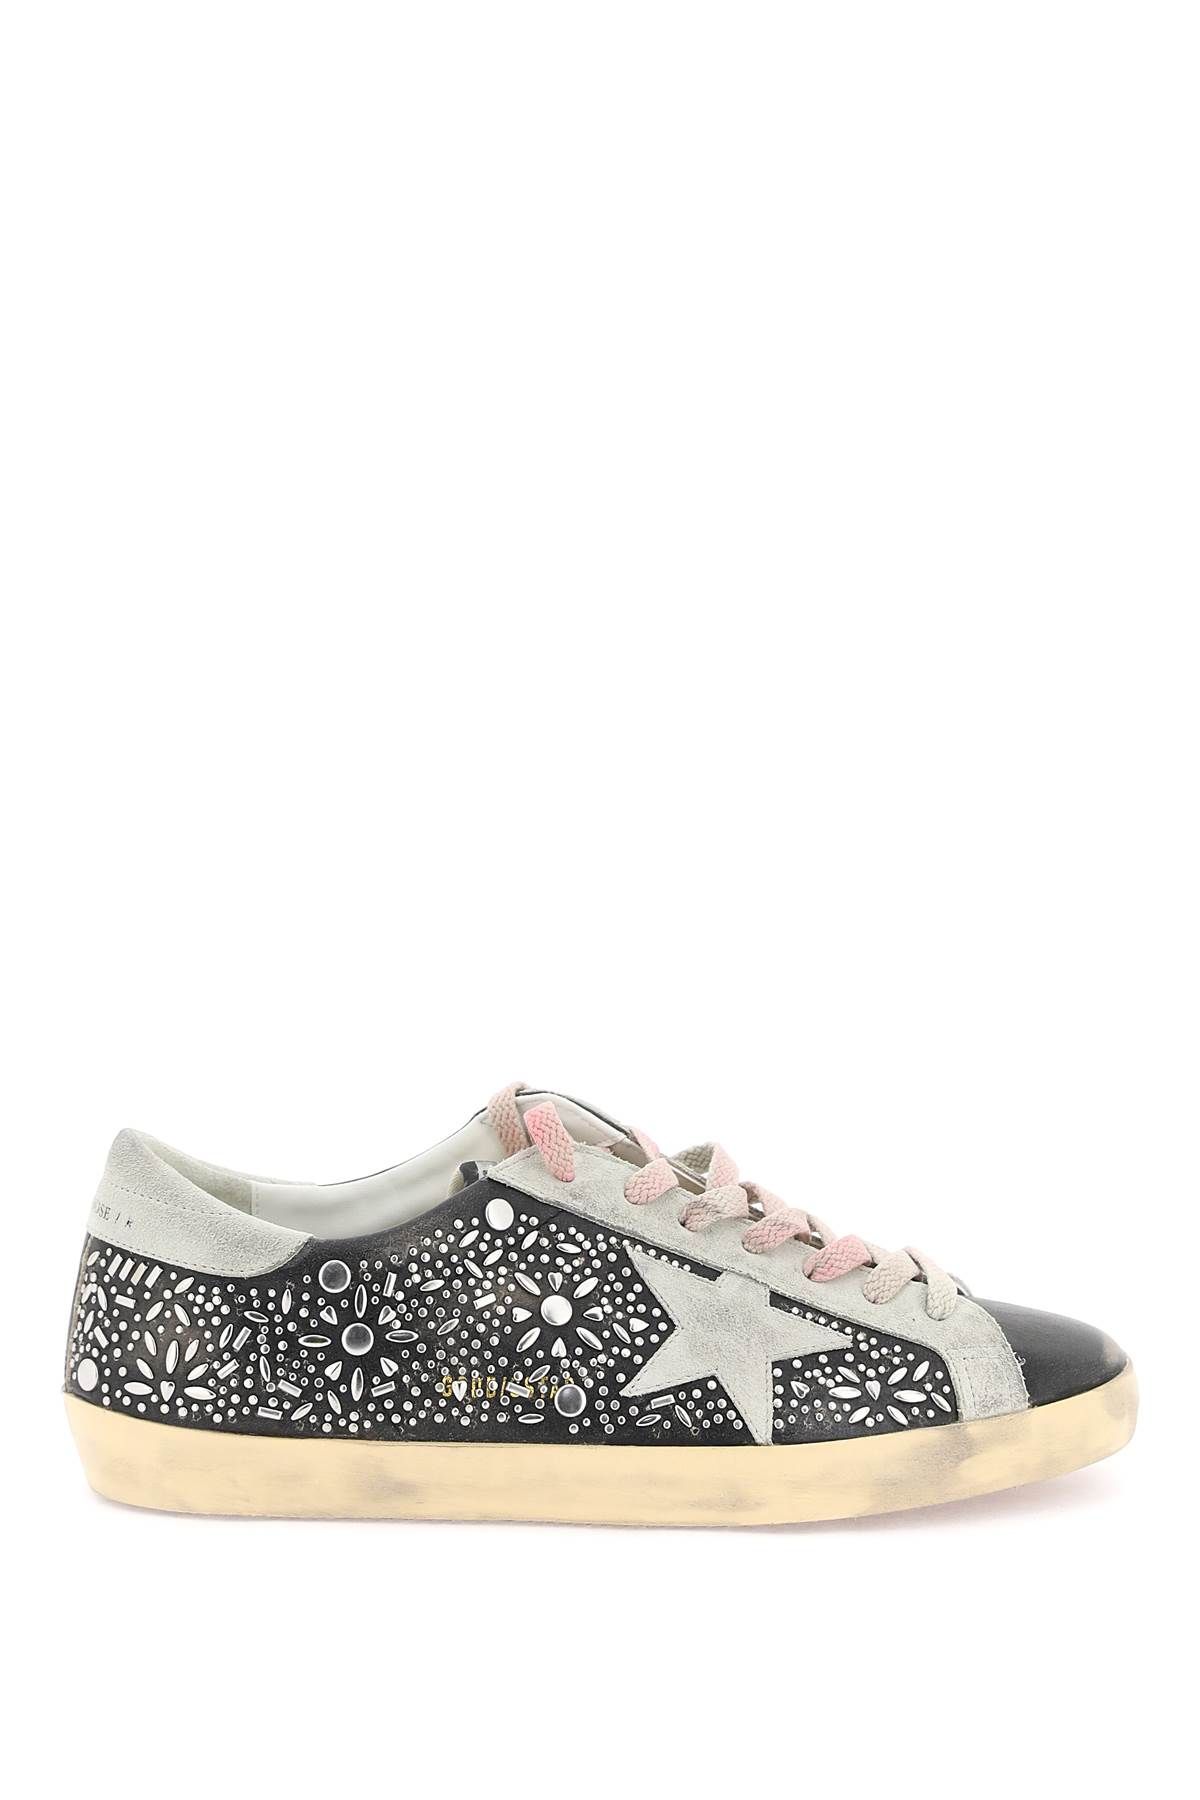 Golden Goose Super-star Studded Sneakers With In Black,grey